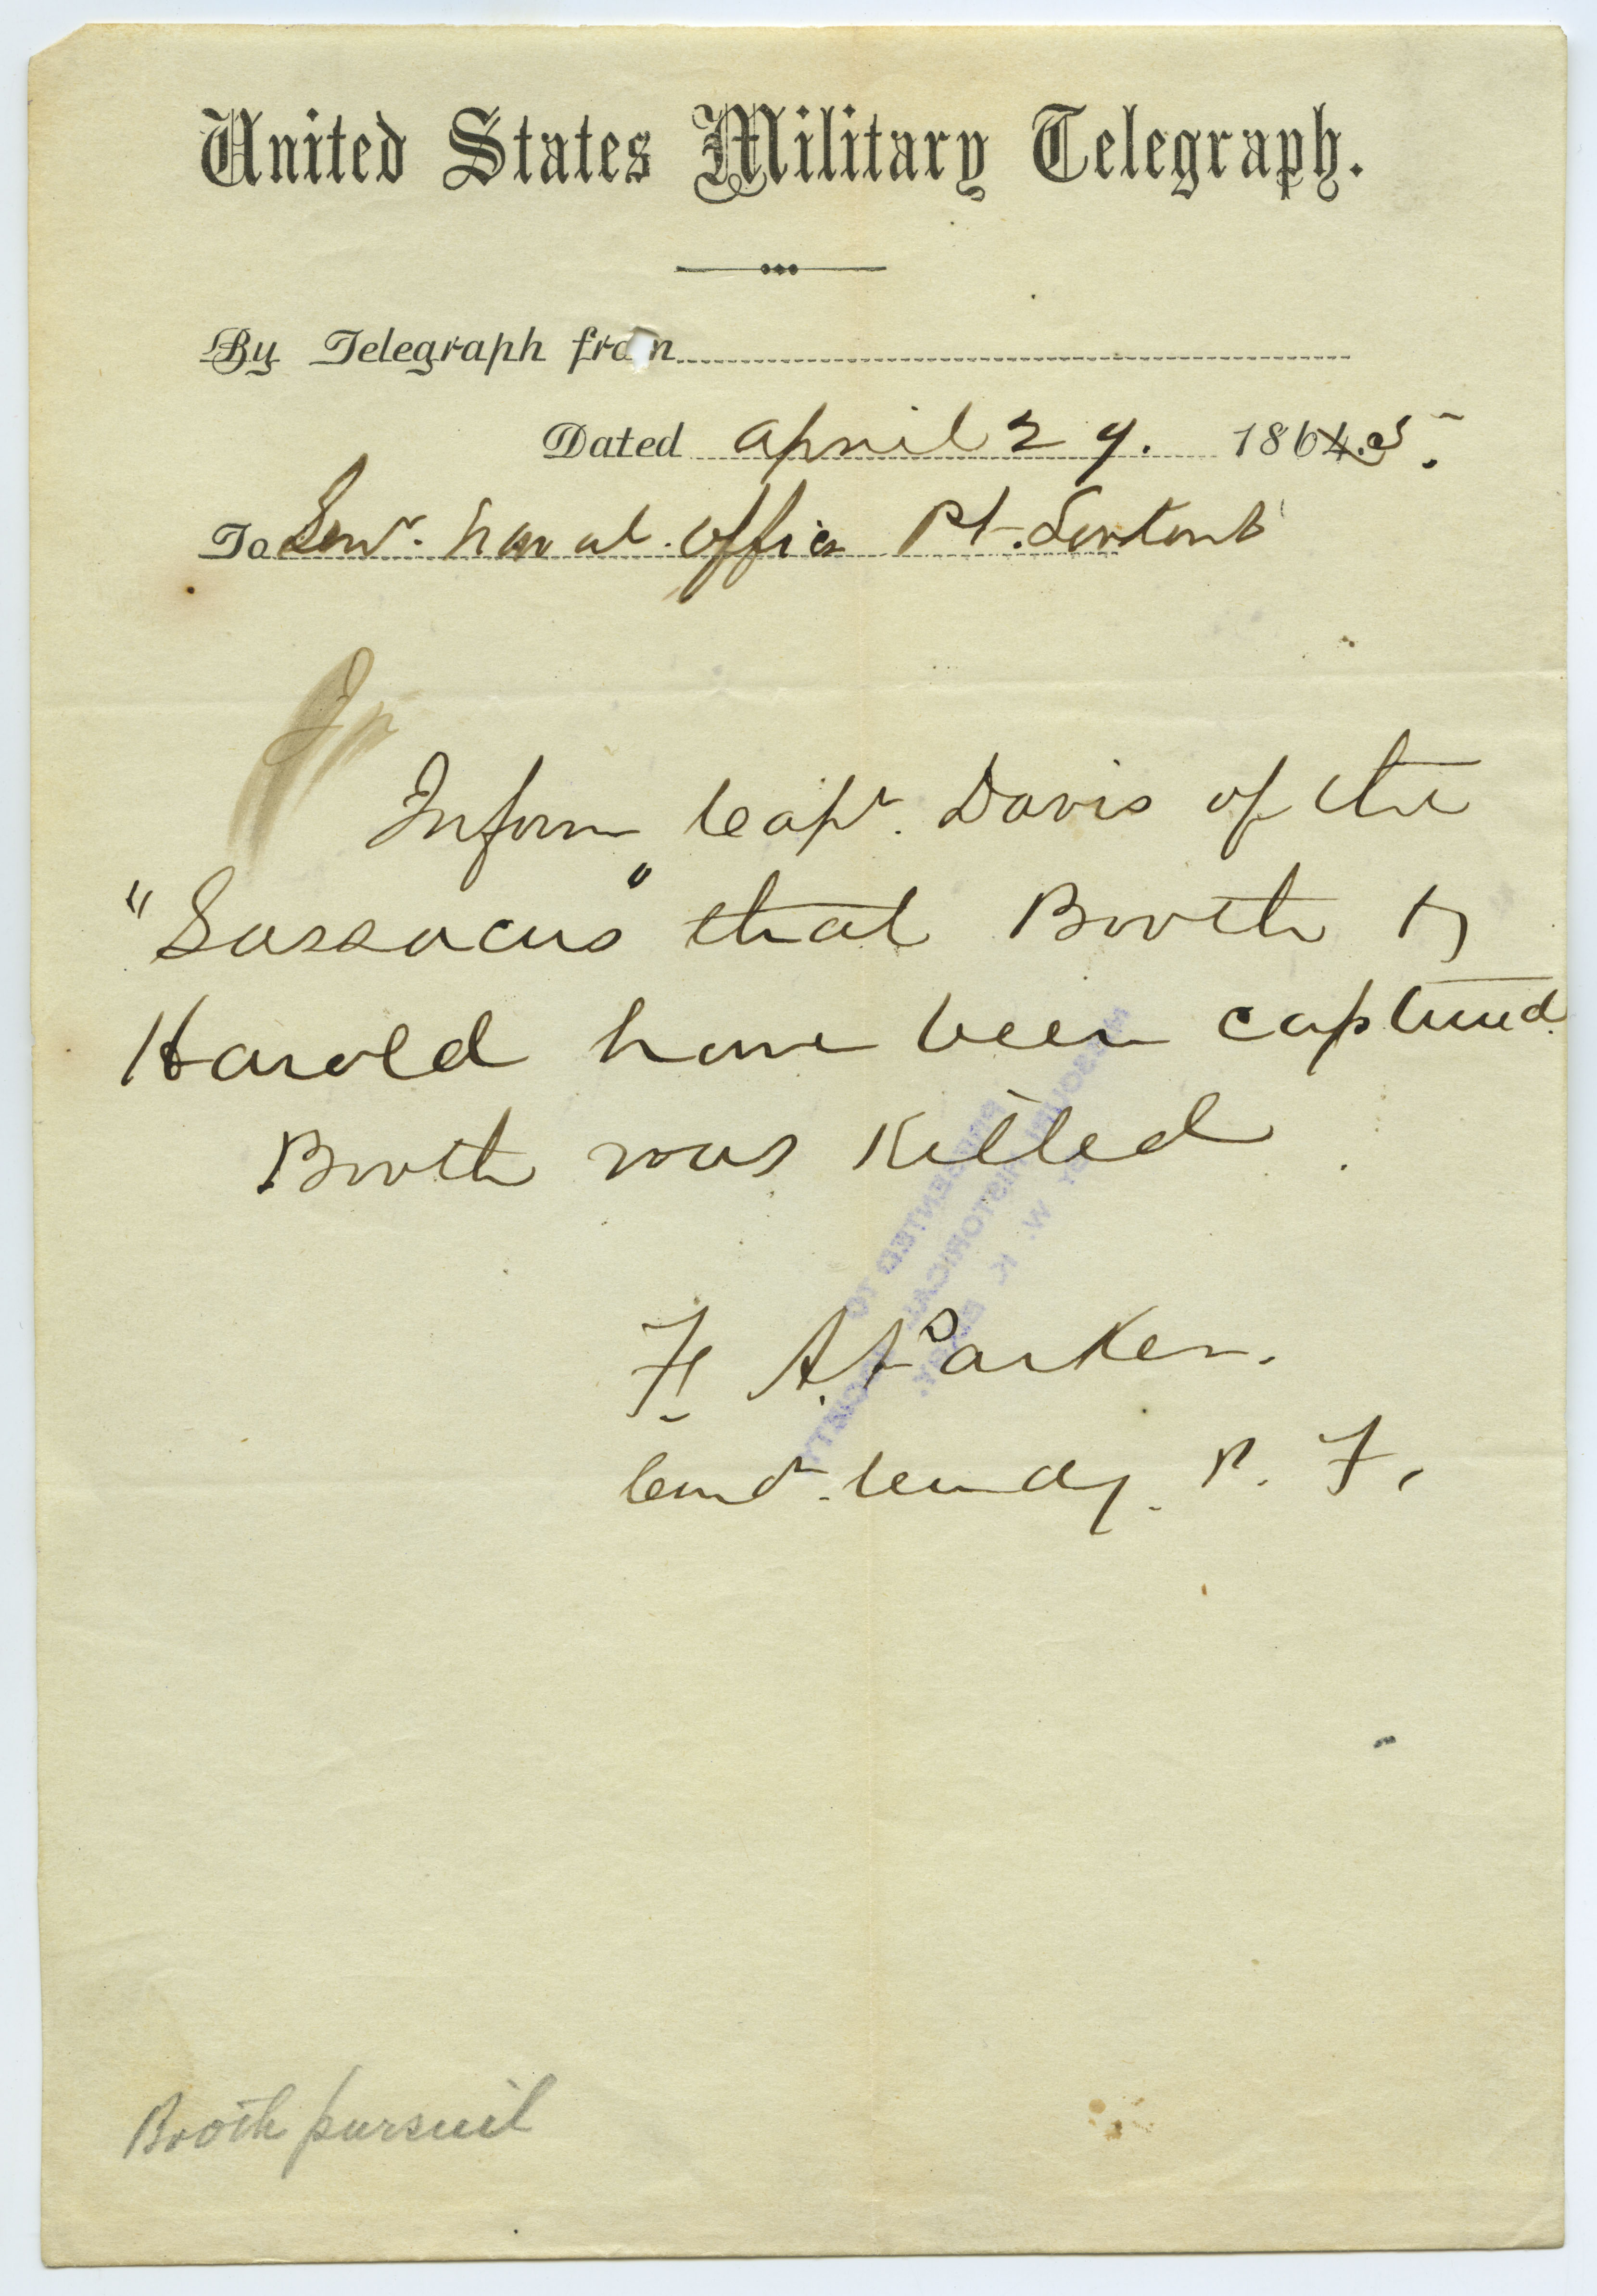 United States Military Telegraph of F.A. Parker to Senr. Naval Officer, Pt. Lookout, April 29, 1865